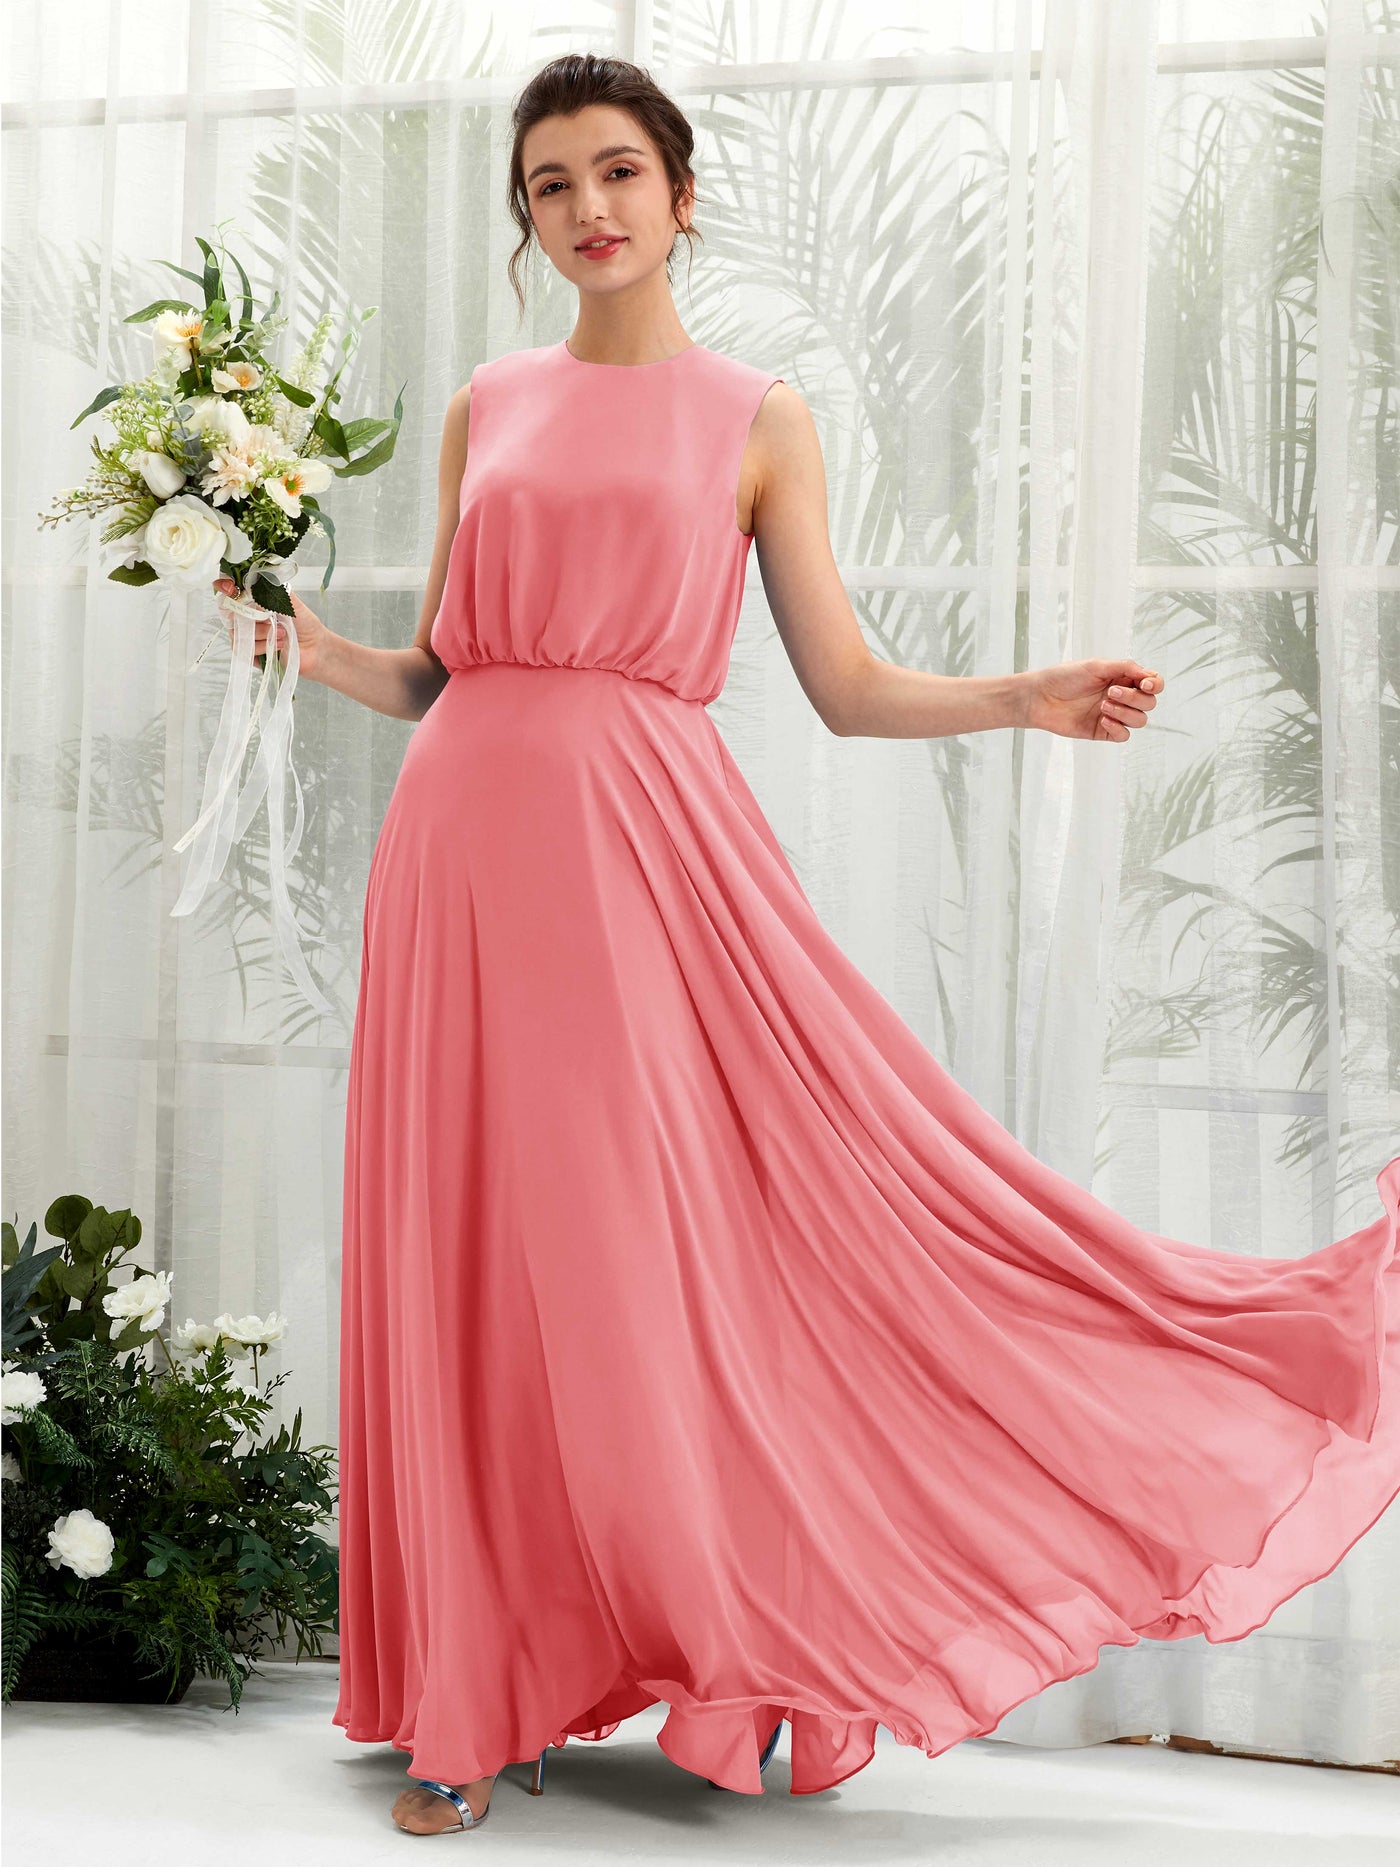 Coral Pink Bridesmaid Dresses Bridesmaid Dress A-line Chiffon Round Full Length Sleeveless Wedding Party Dress (81222830)#color_coral-pink